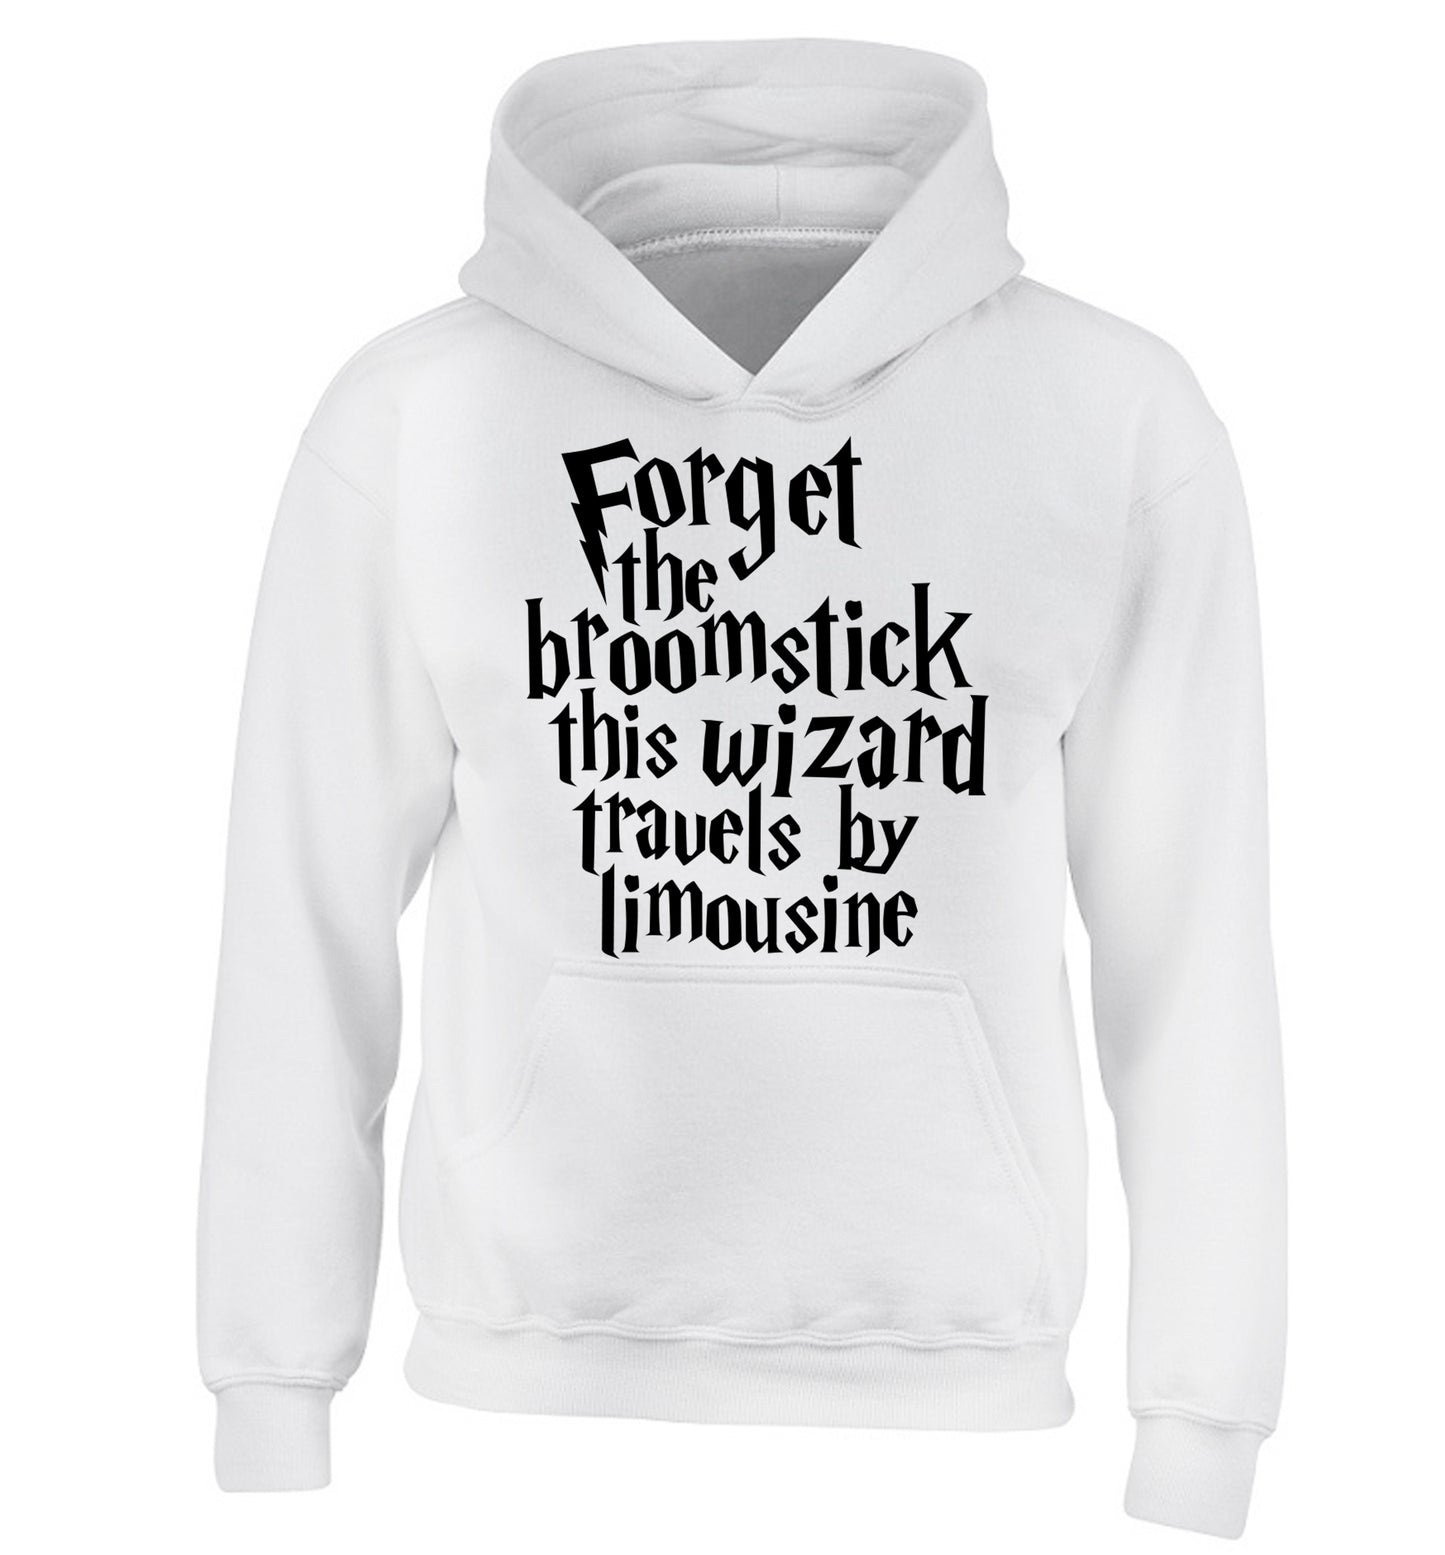 Forget the broomstick this wizard travels by limousine children's white hoodie 12-14 Years